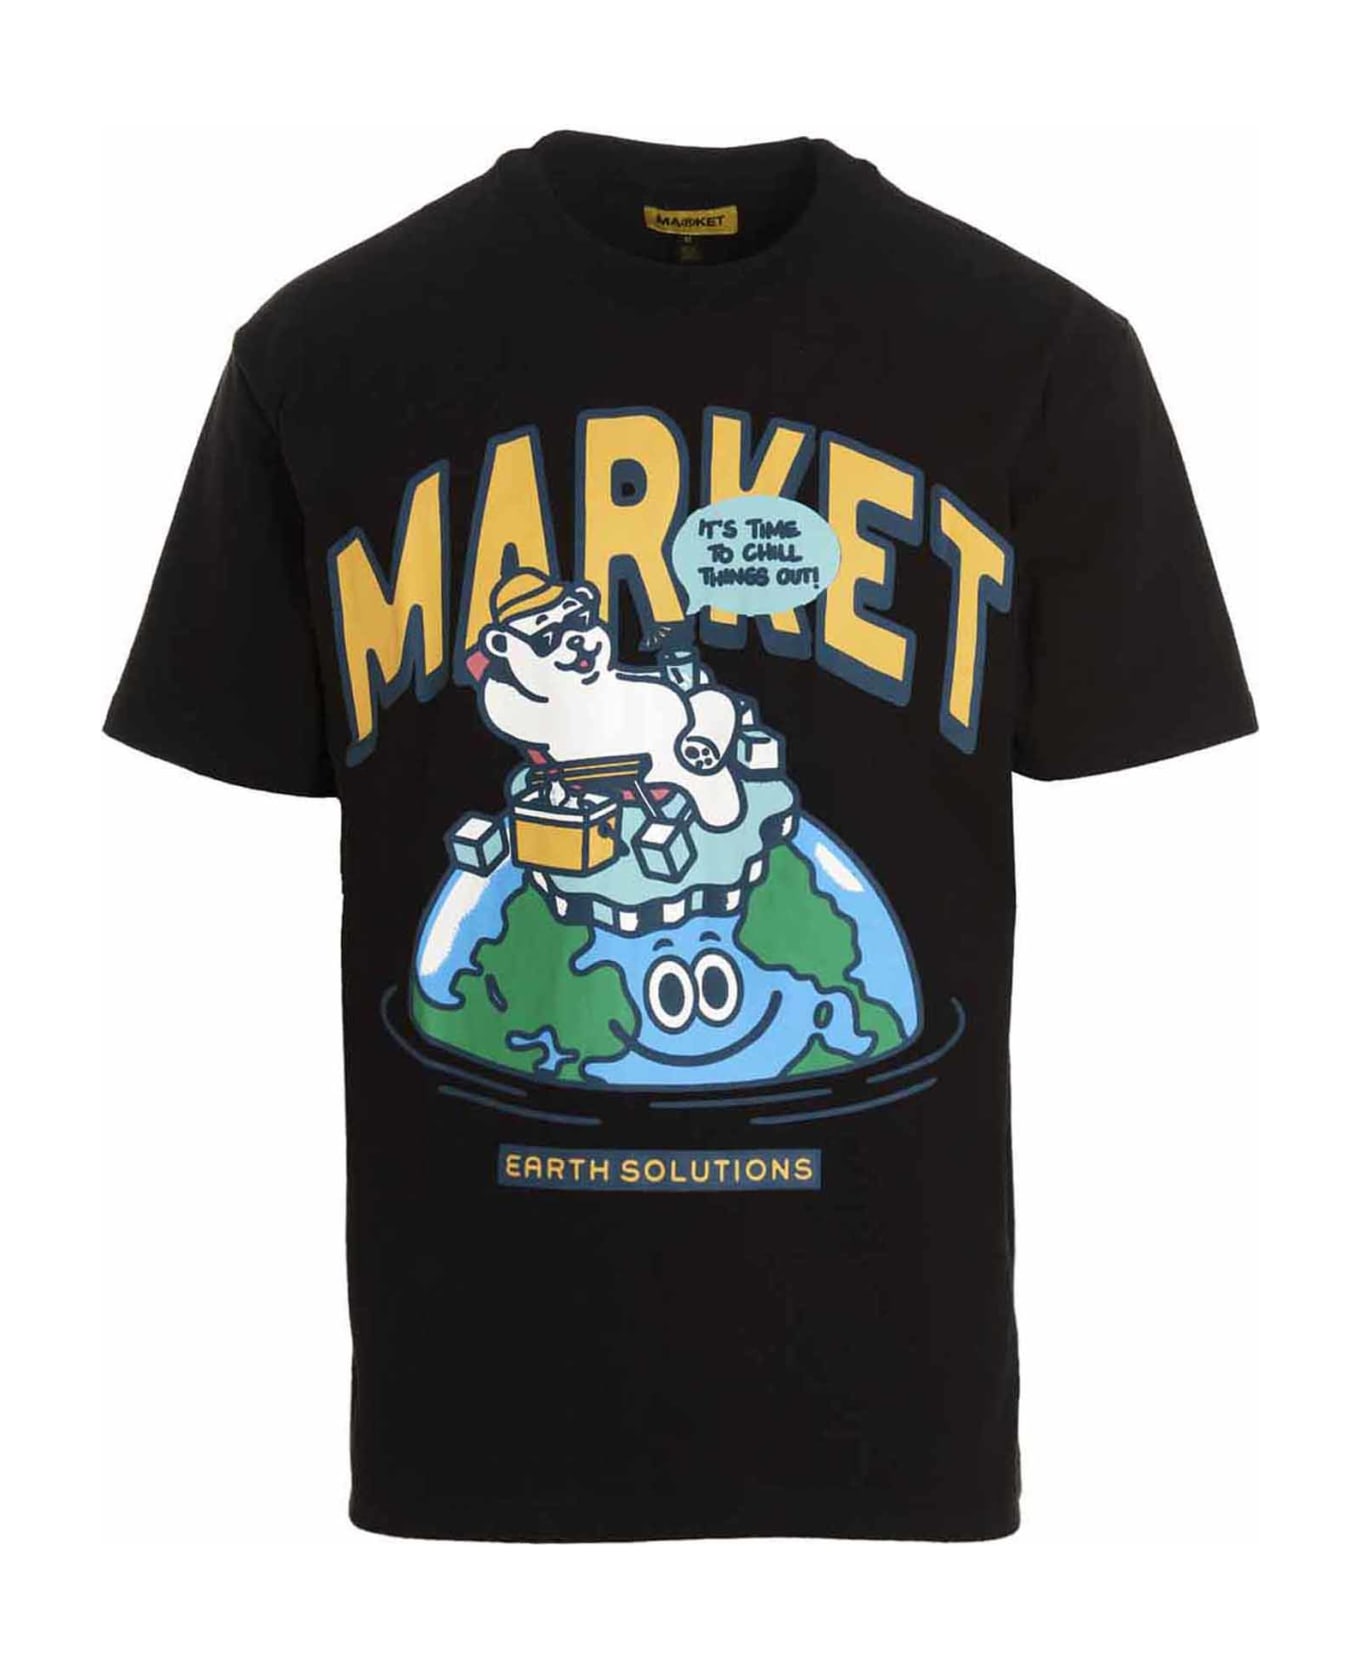 Market T-shirt 'time To Chill Out' - Black  